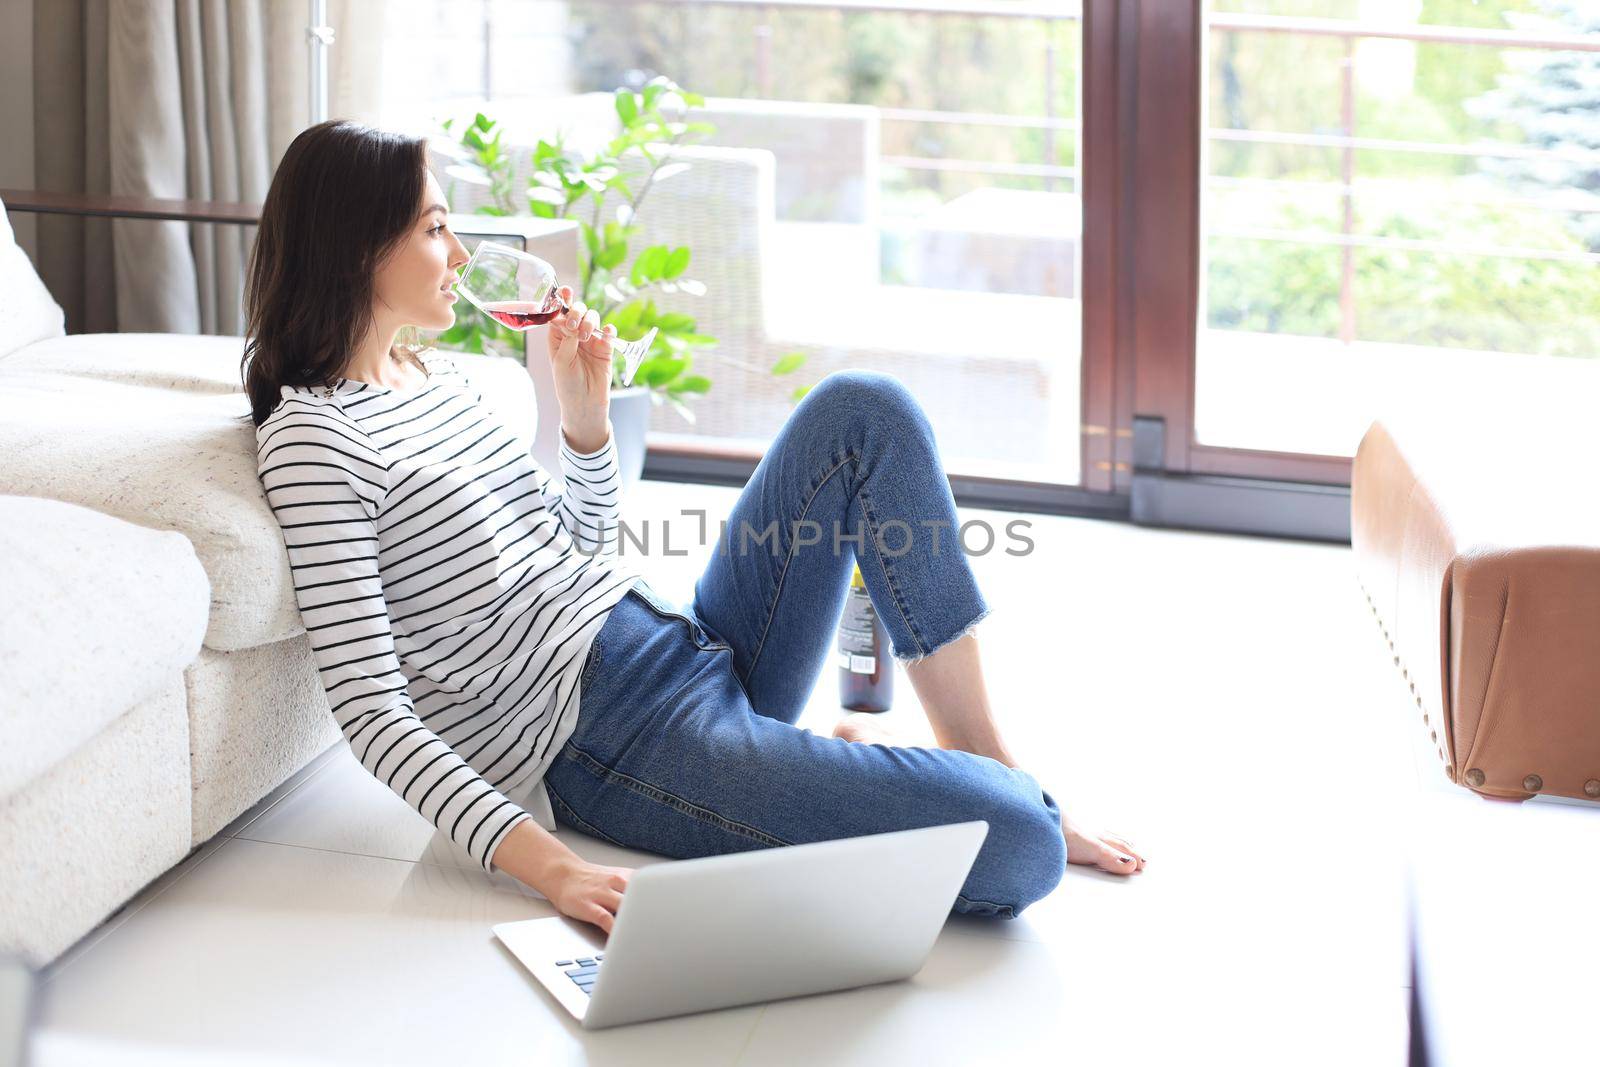 Smiling young woman sitting on floor with laptop computer and chating with friends, drinking wine. by tsyhun